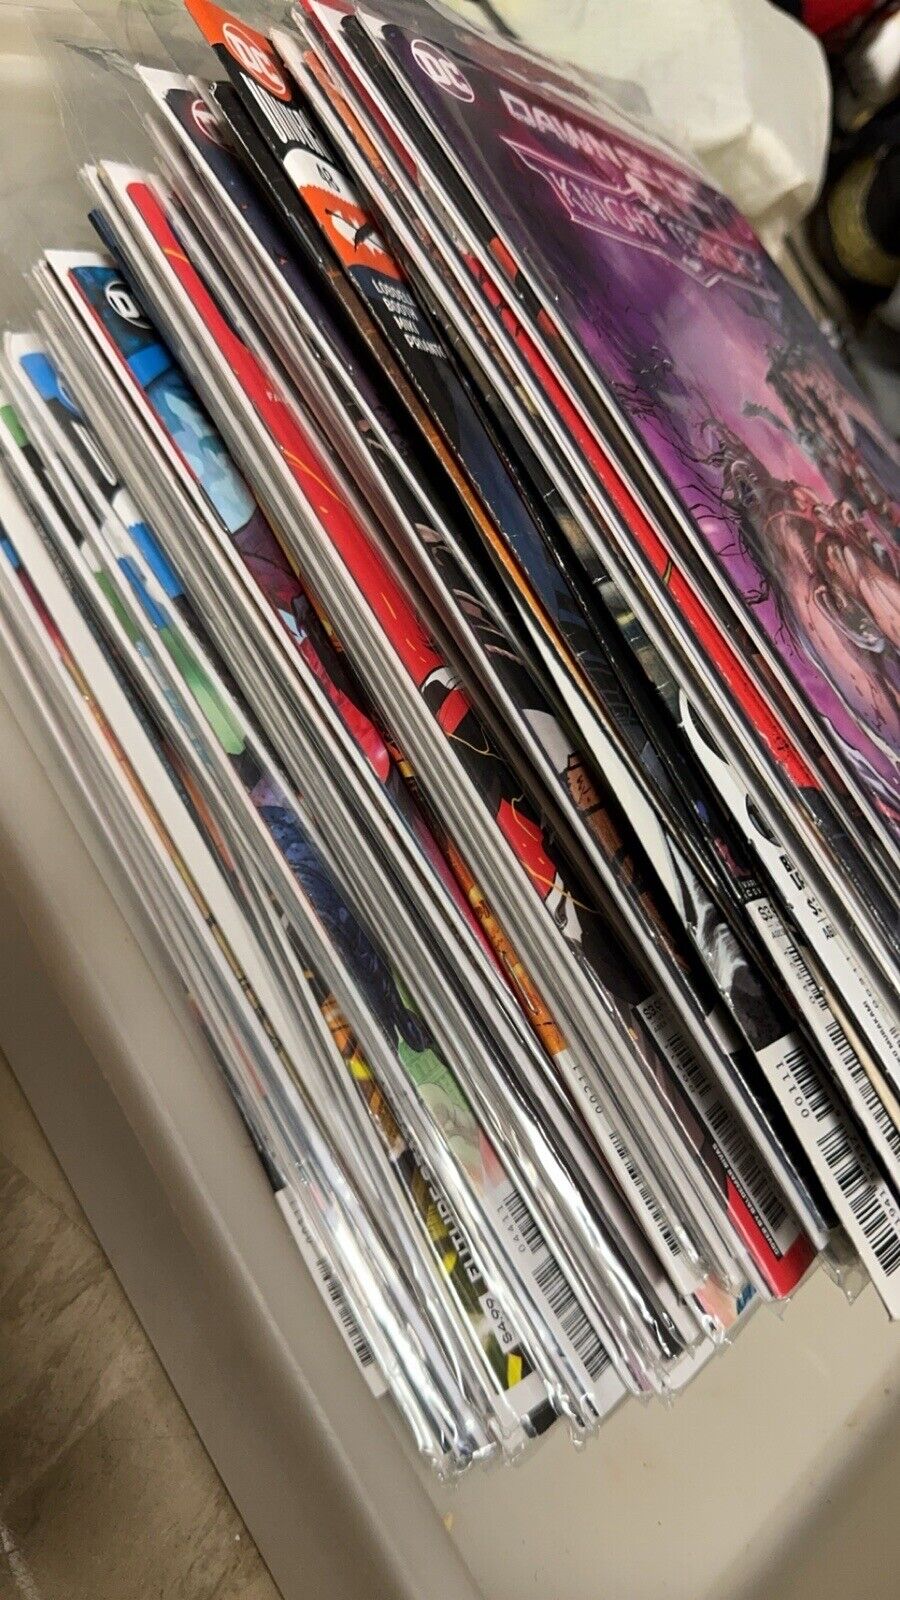 Limited Edition Comic Books. Selling the entire collection for one price.